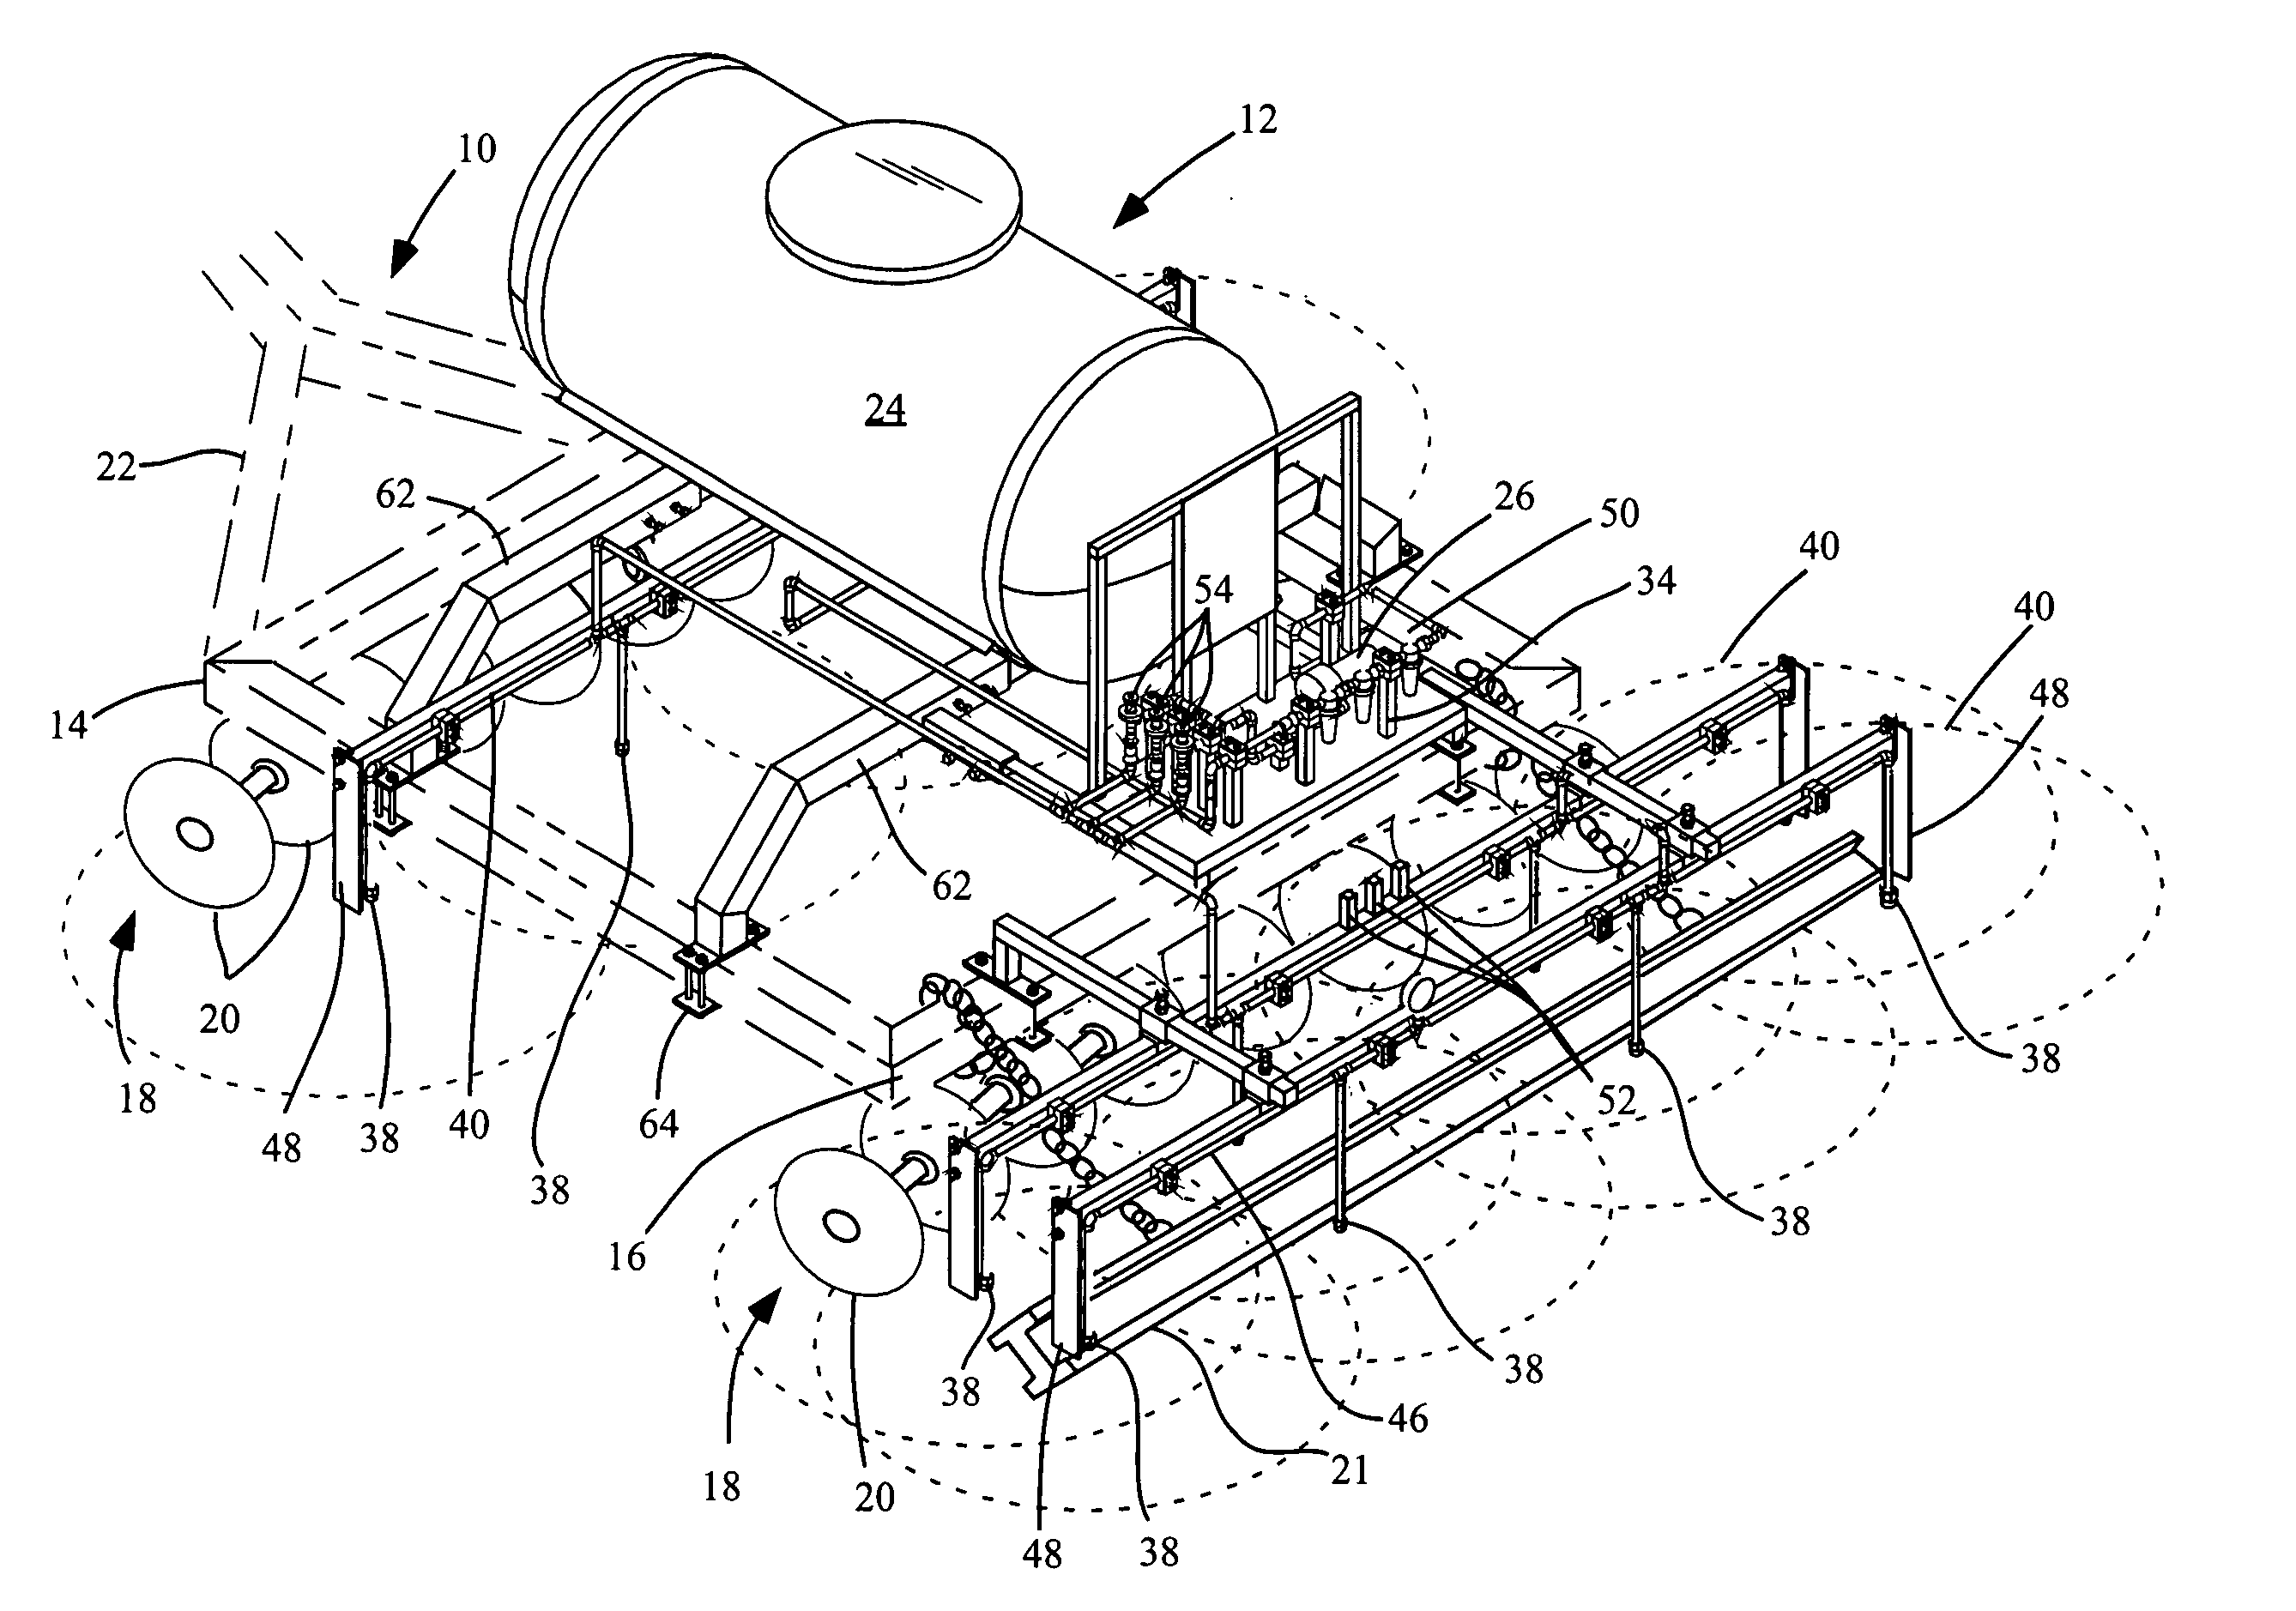 Apparatus for dust control